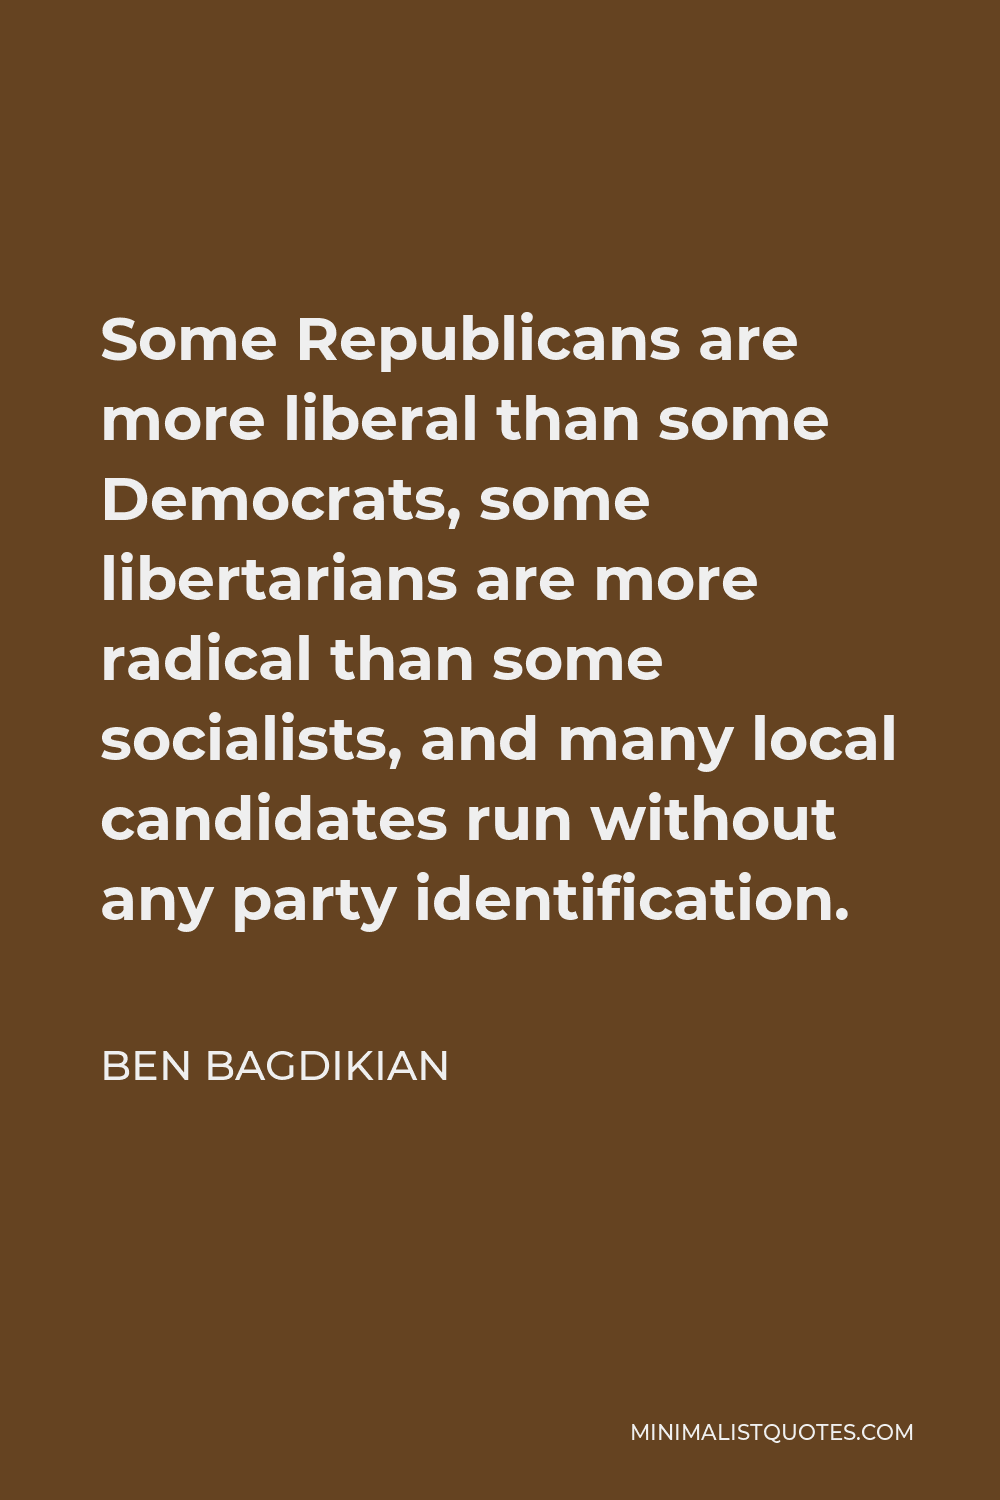 Ben Bagdikian Quote - Some Republicans are more liberal than some Democrats, some libertarians are more radical than some socialists, and many local candidates run without any party identification.